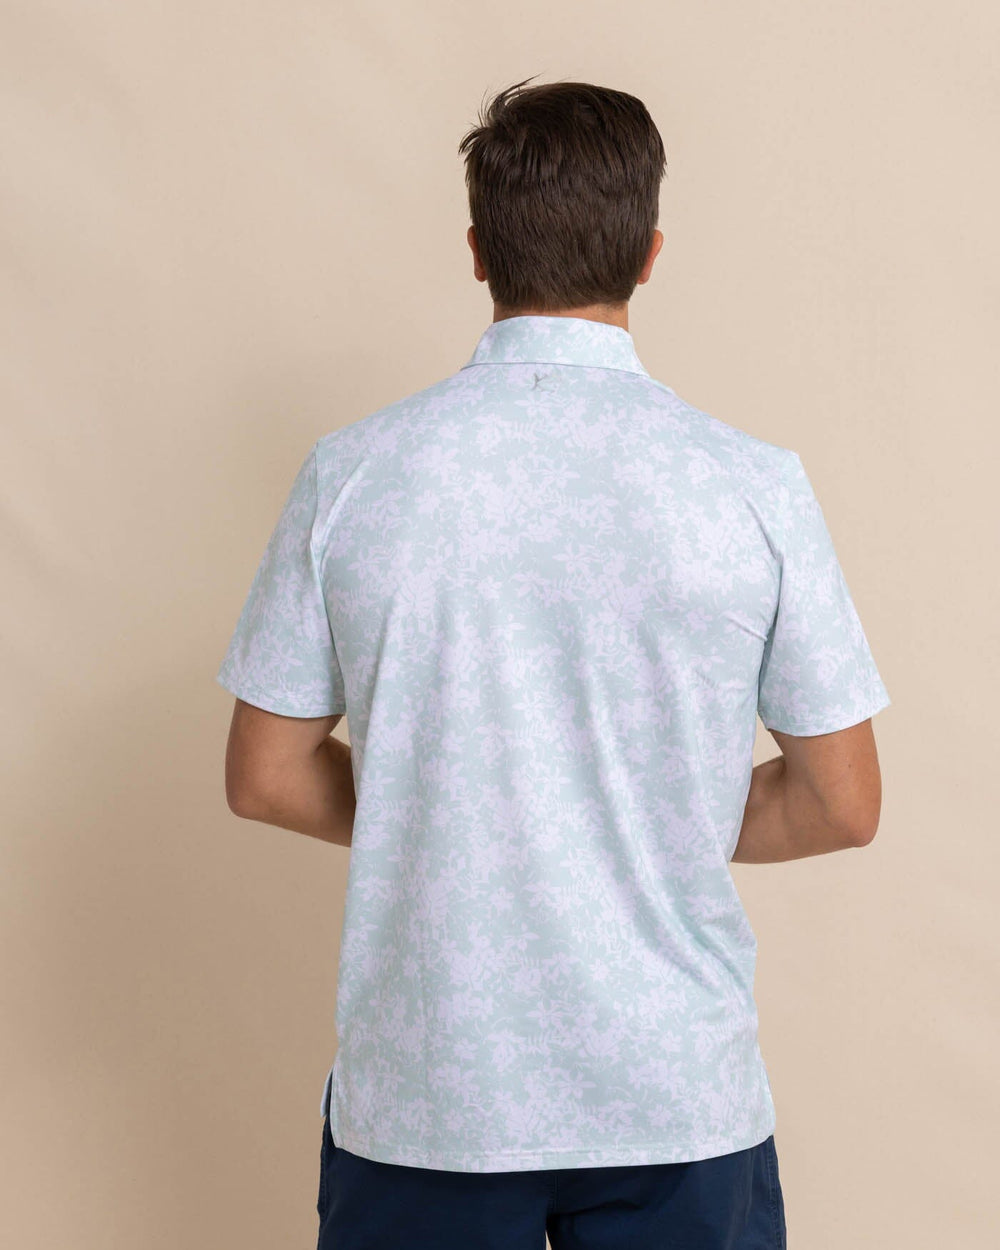 The back view of the Southern Tide Driver Island Blooms Printed Polo by Southern Tide - Surf Spray Sage